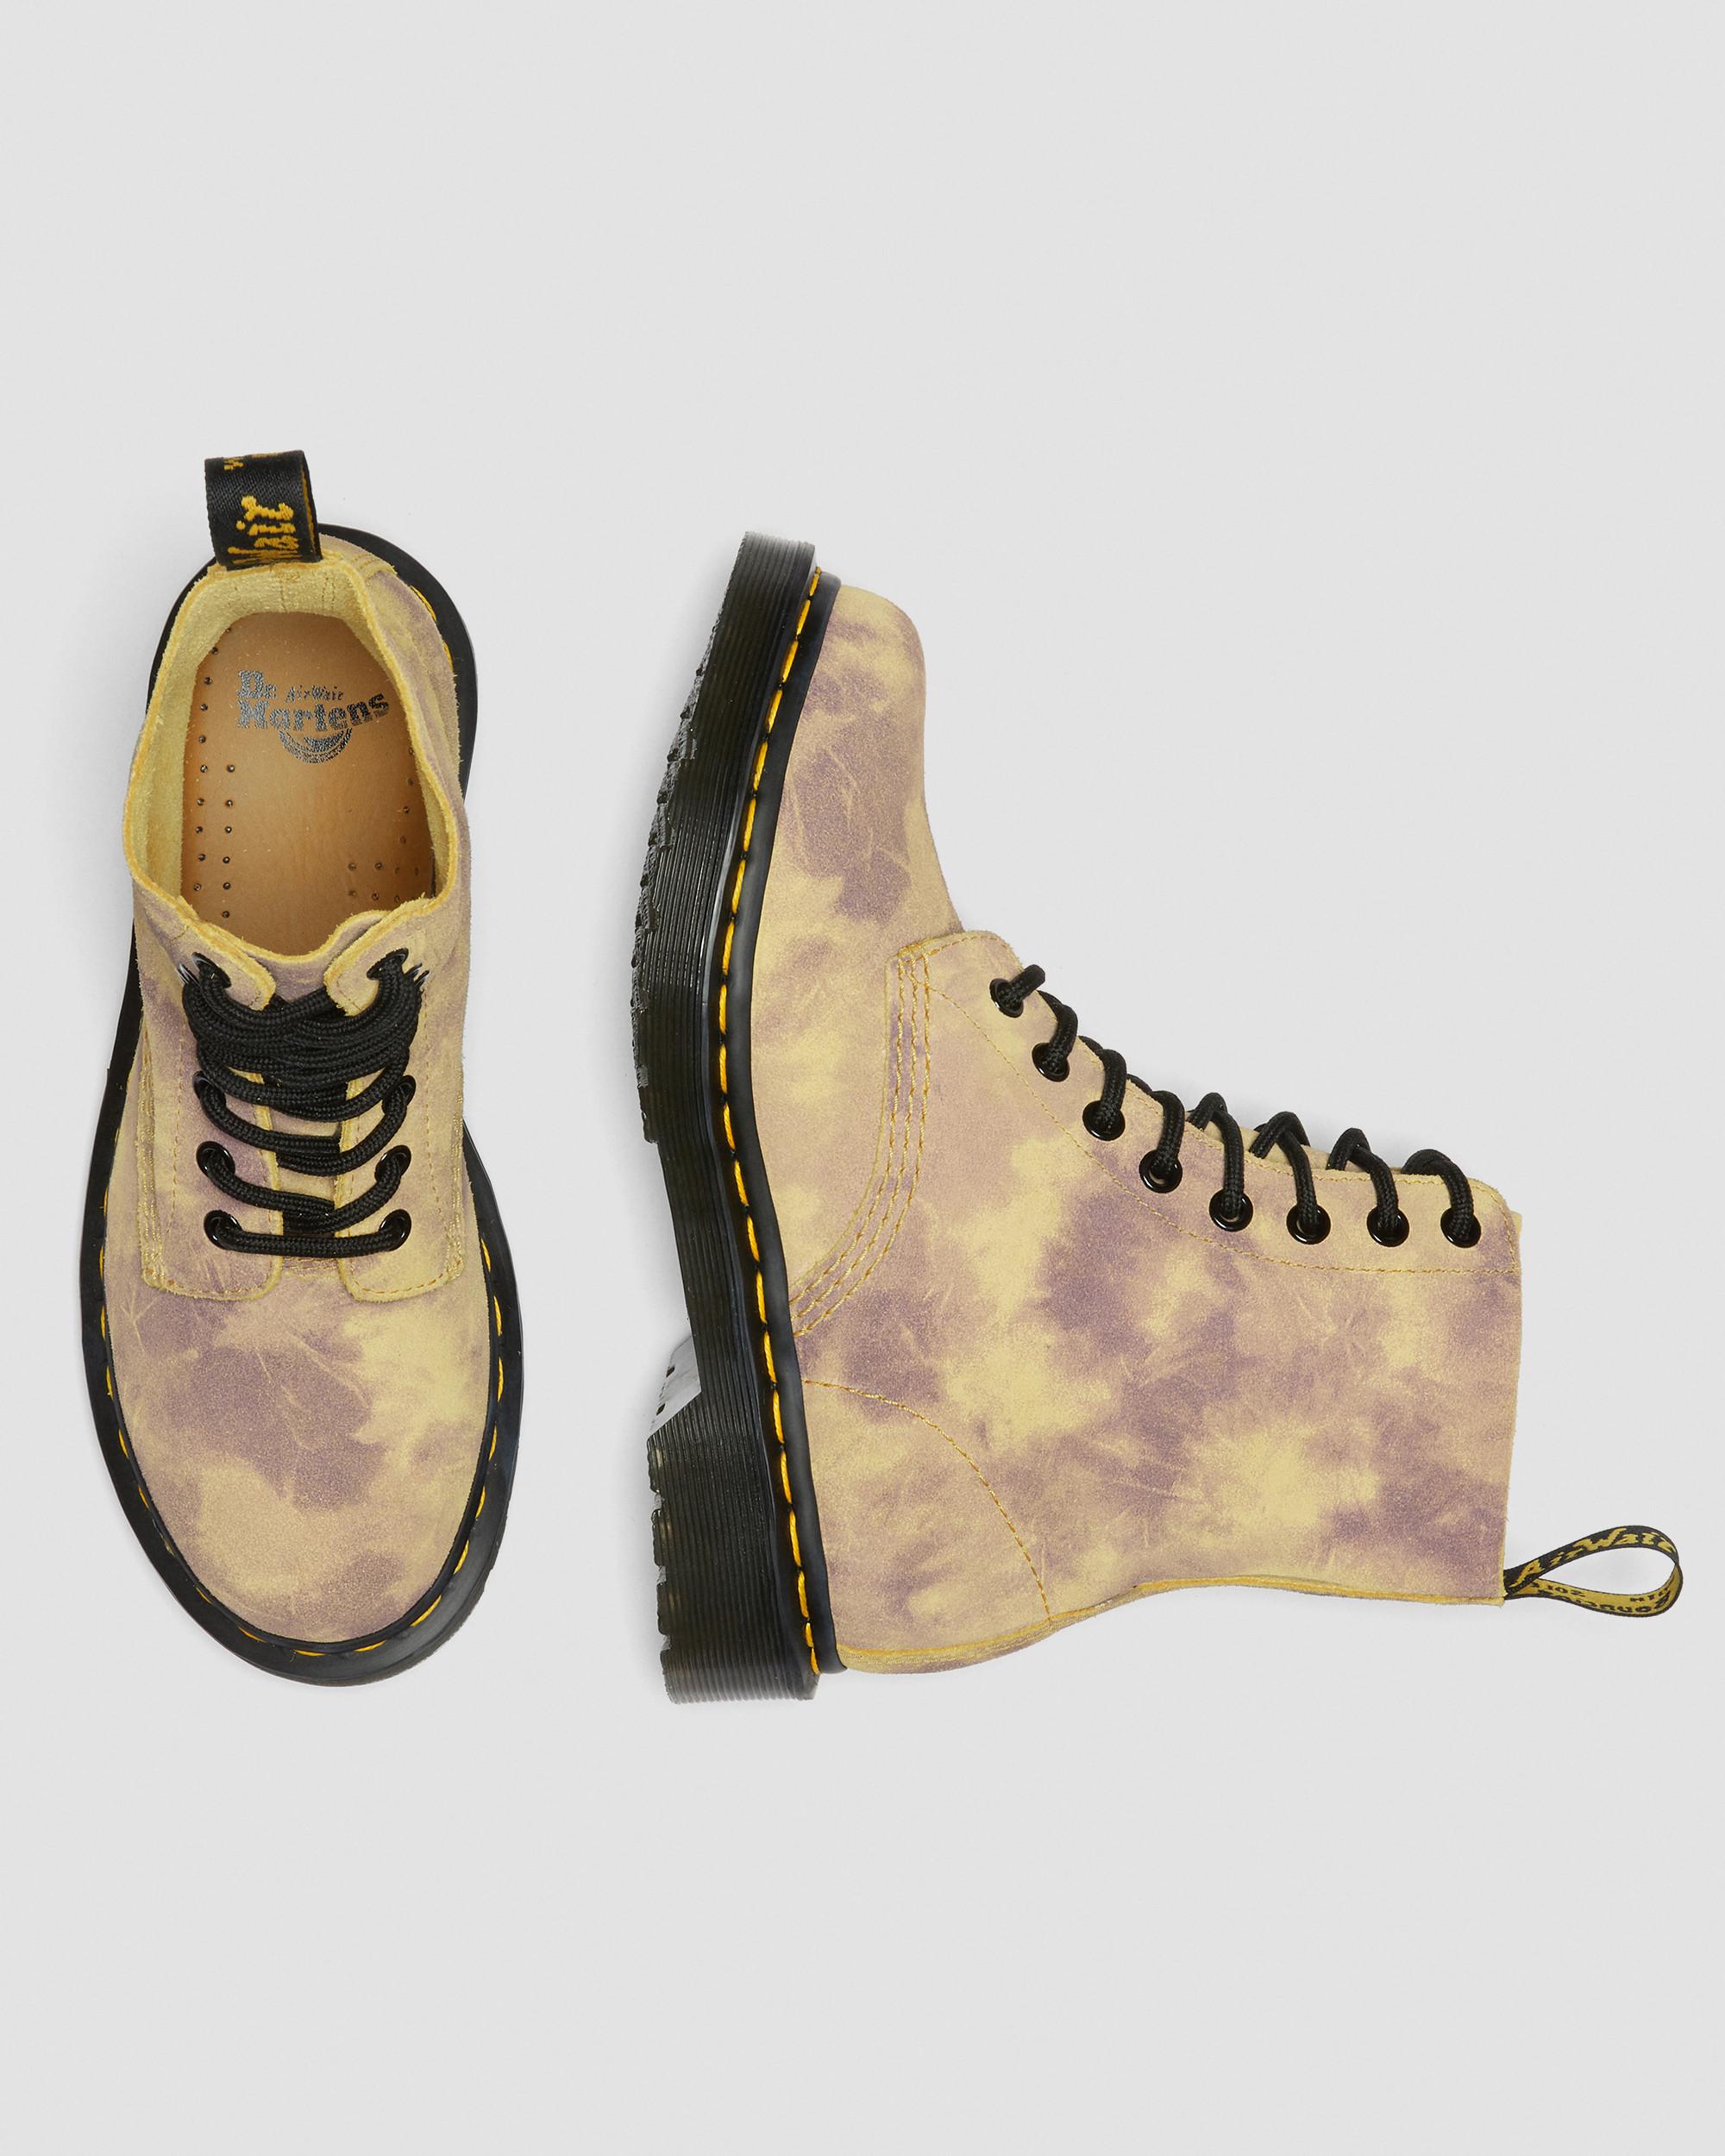 1460 Pascal Tie Dye Lace Up Boots1460 Pascal Tie Dye Leather Lace Up Boots Dr. Martens